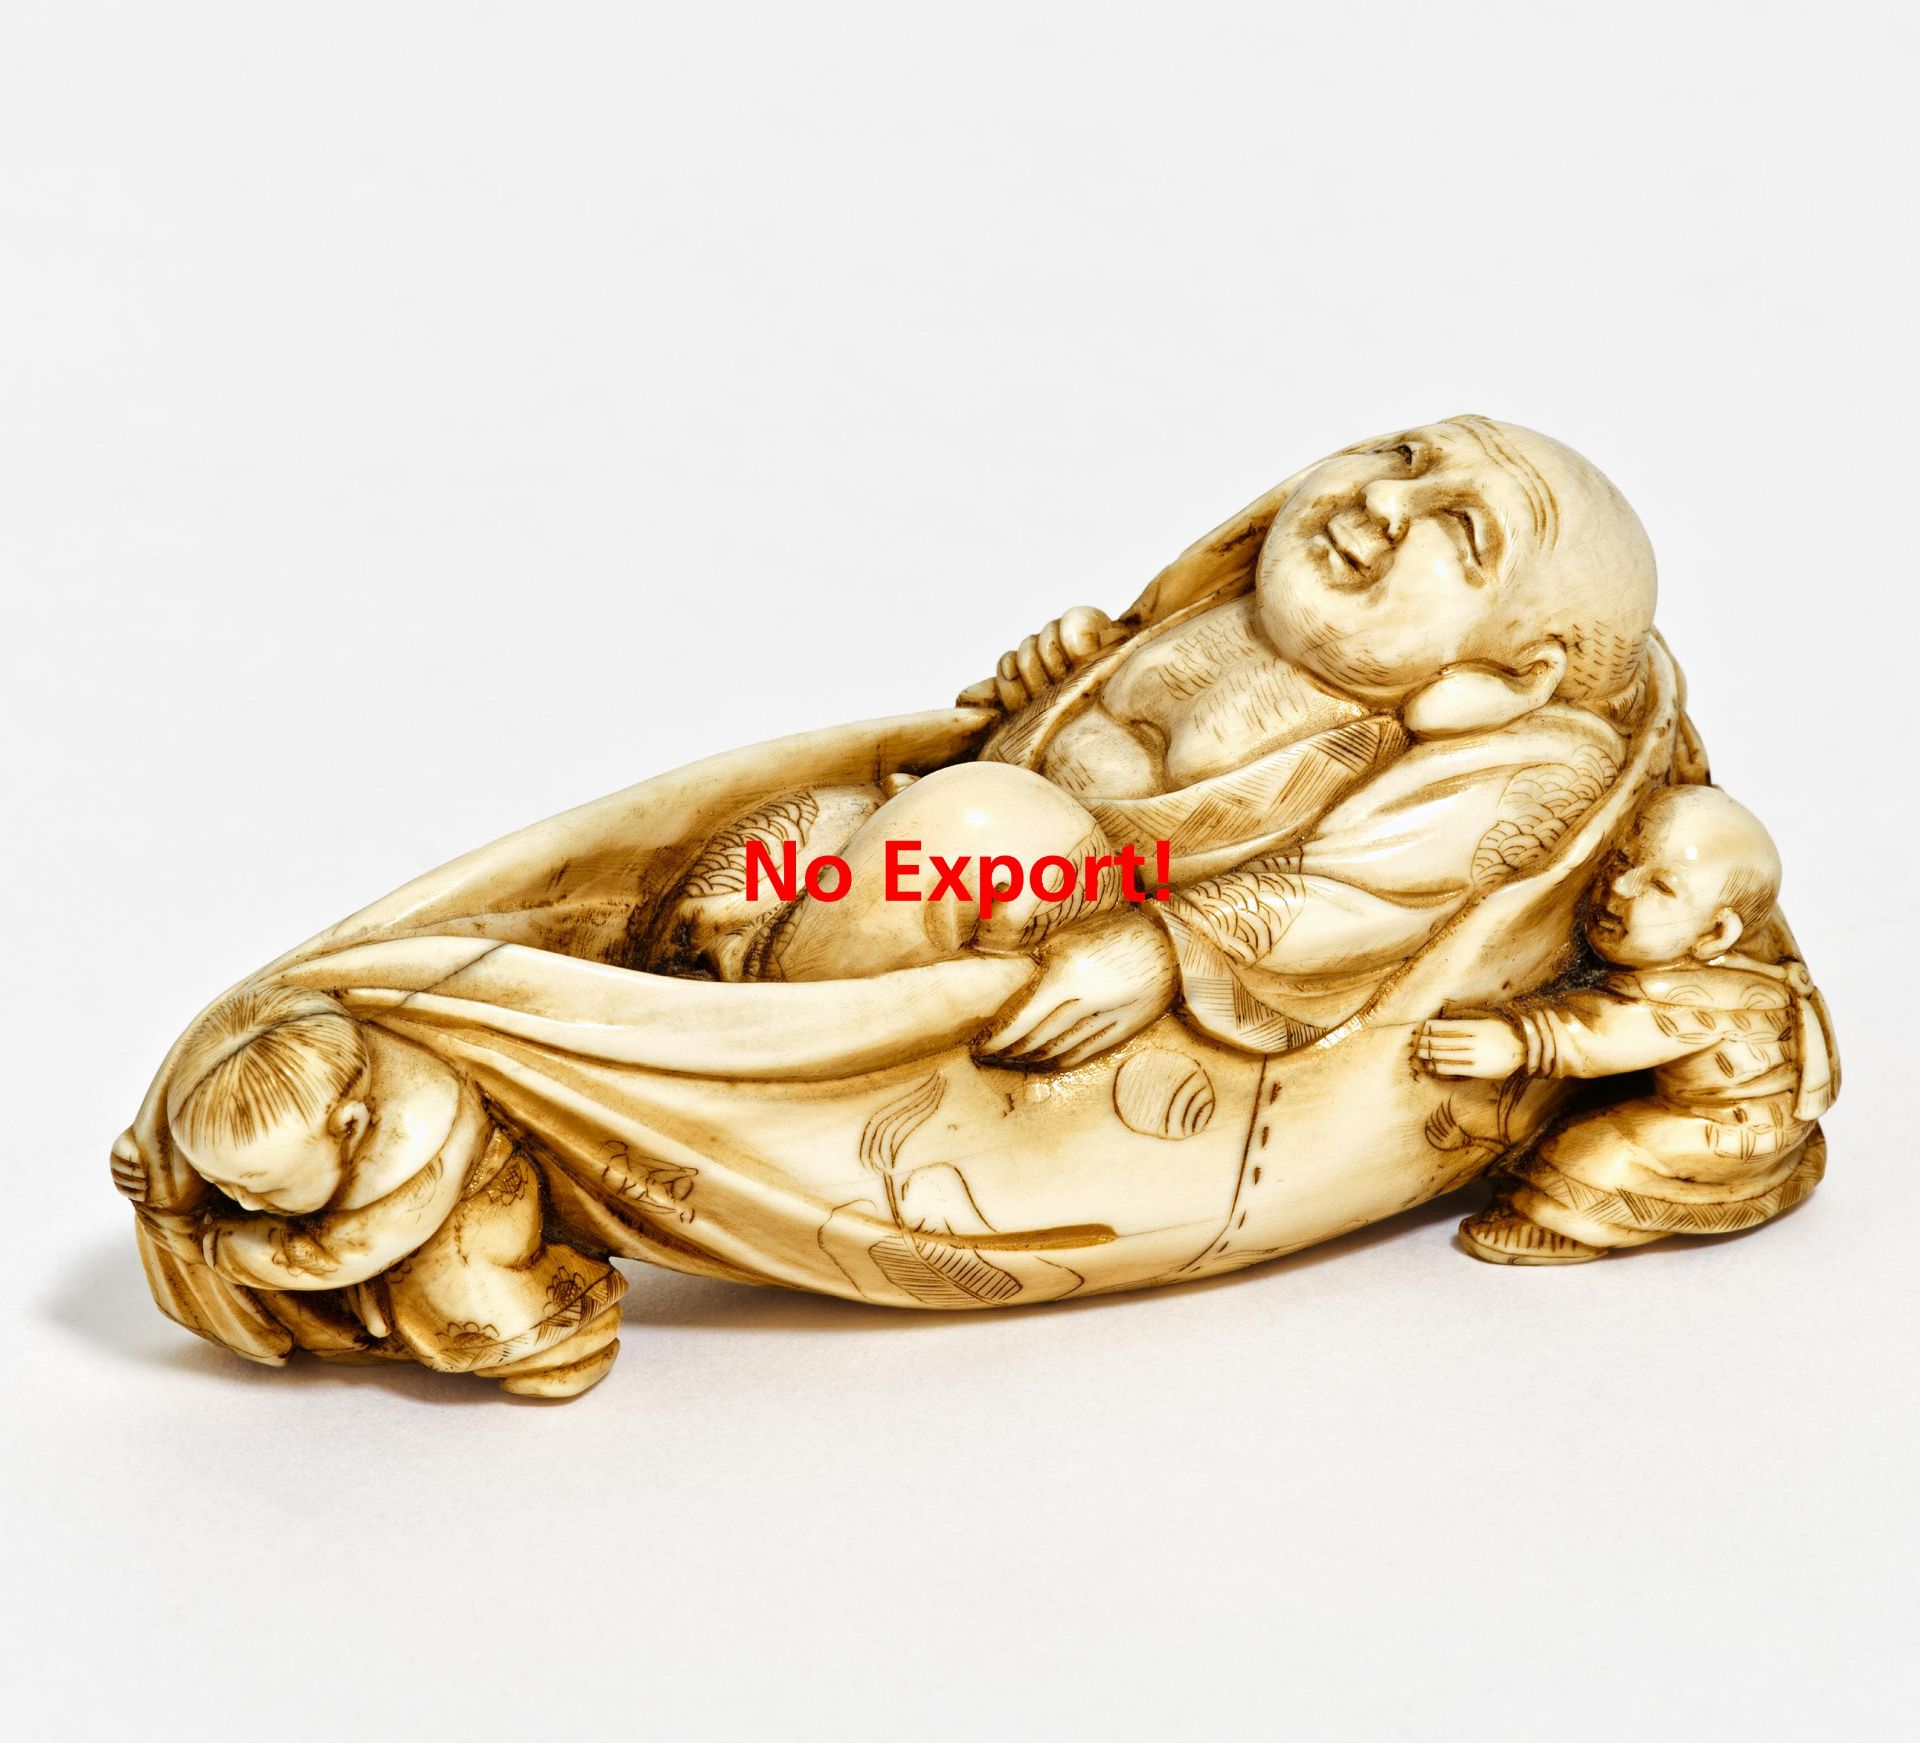 LARGE NETSUKE OF HOTEI WITH KARAKO. Origin: Japan. Date: 19th c. Technique: Ivory finely carved